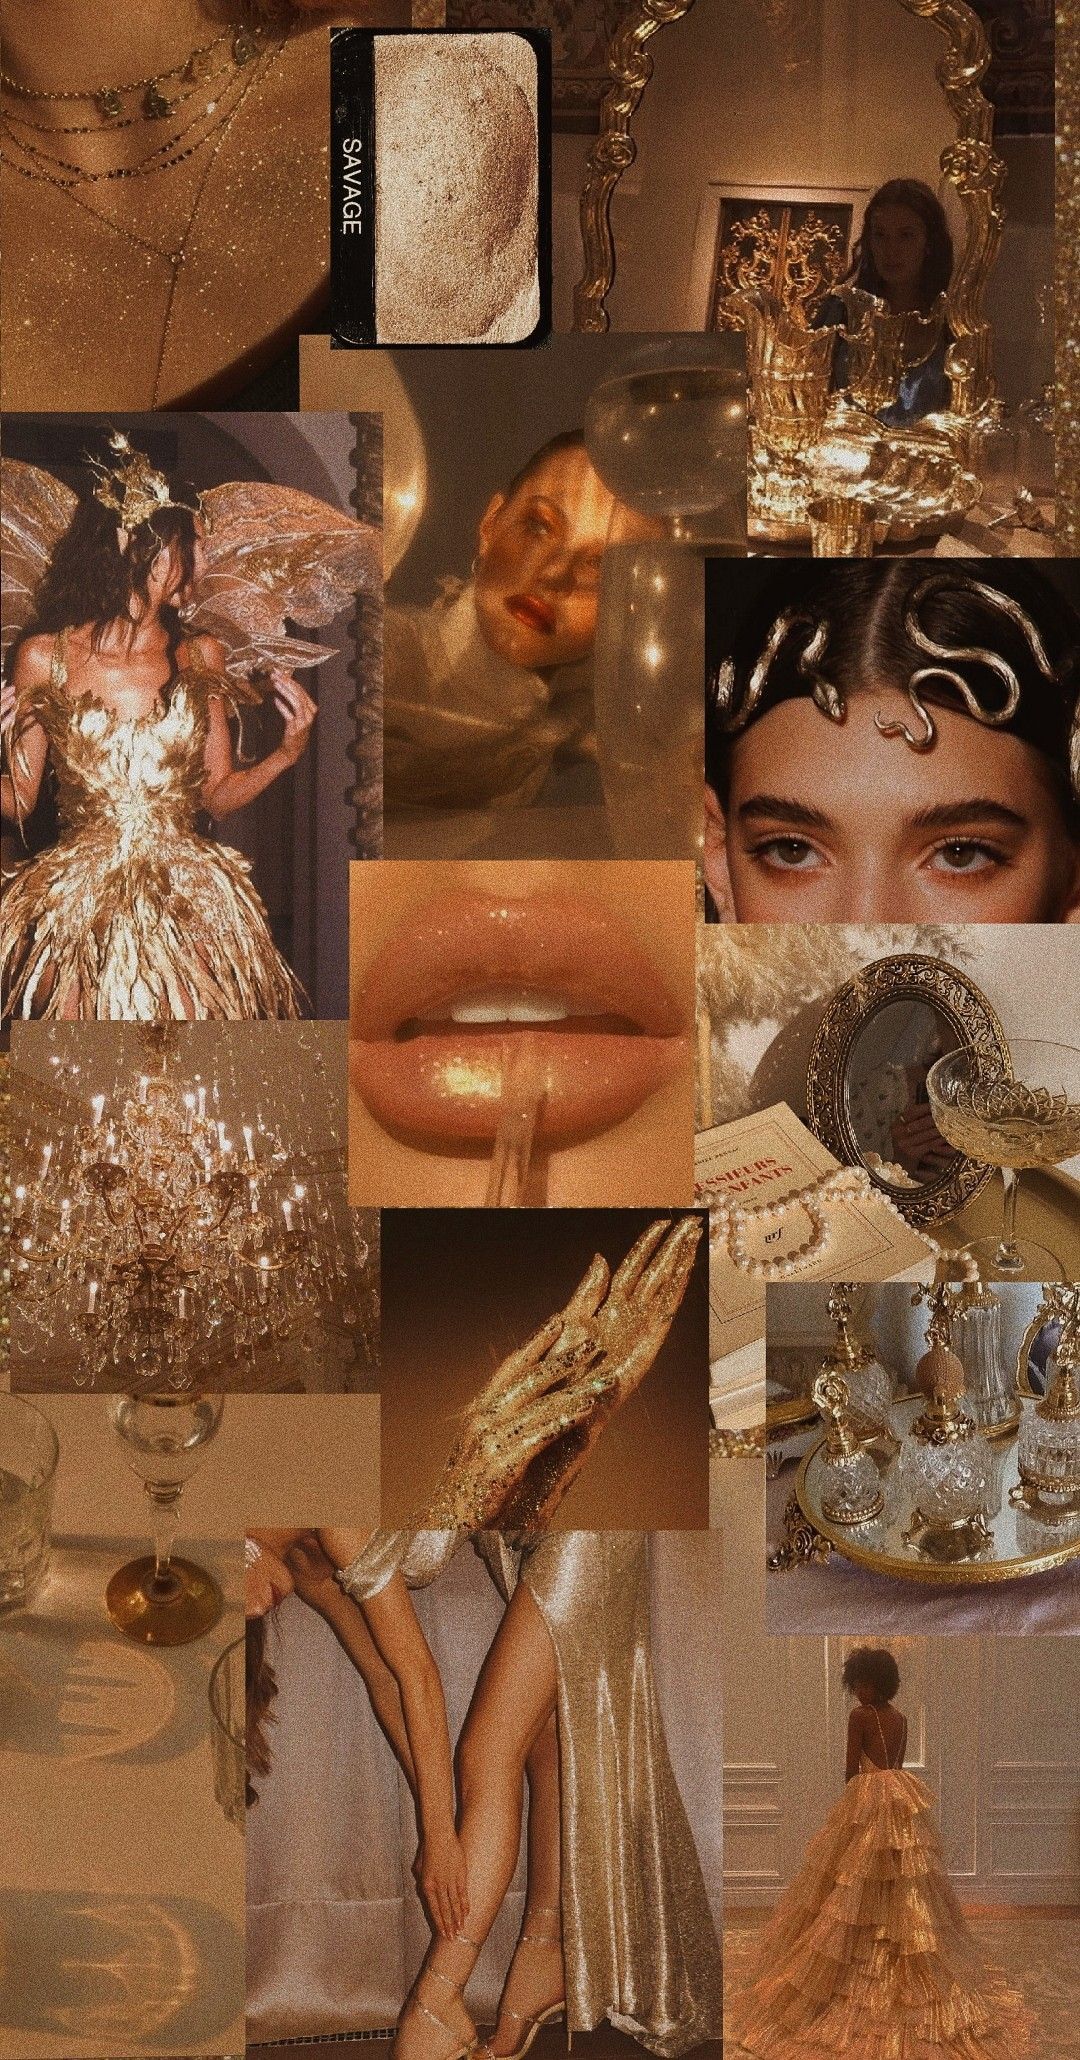 Aesthetic collage of gold and brown images including lips, dresses, and jewelry - Gold